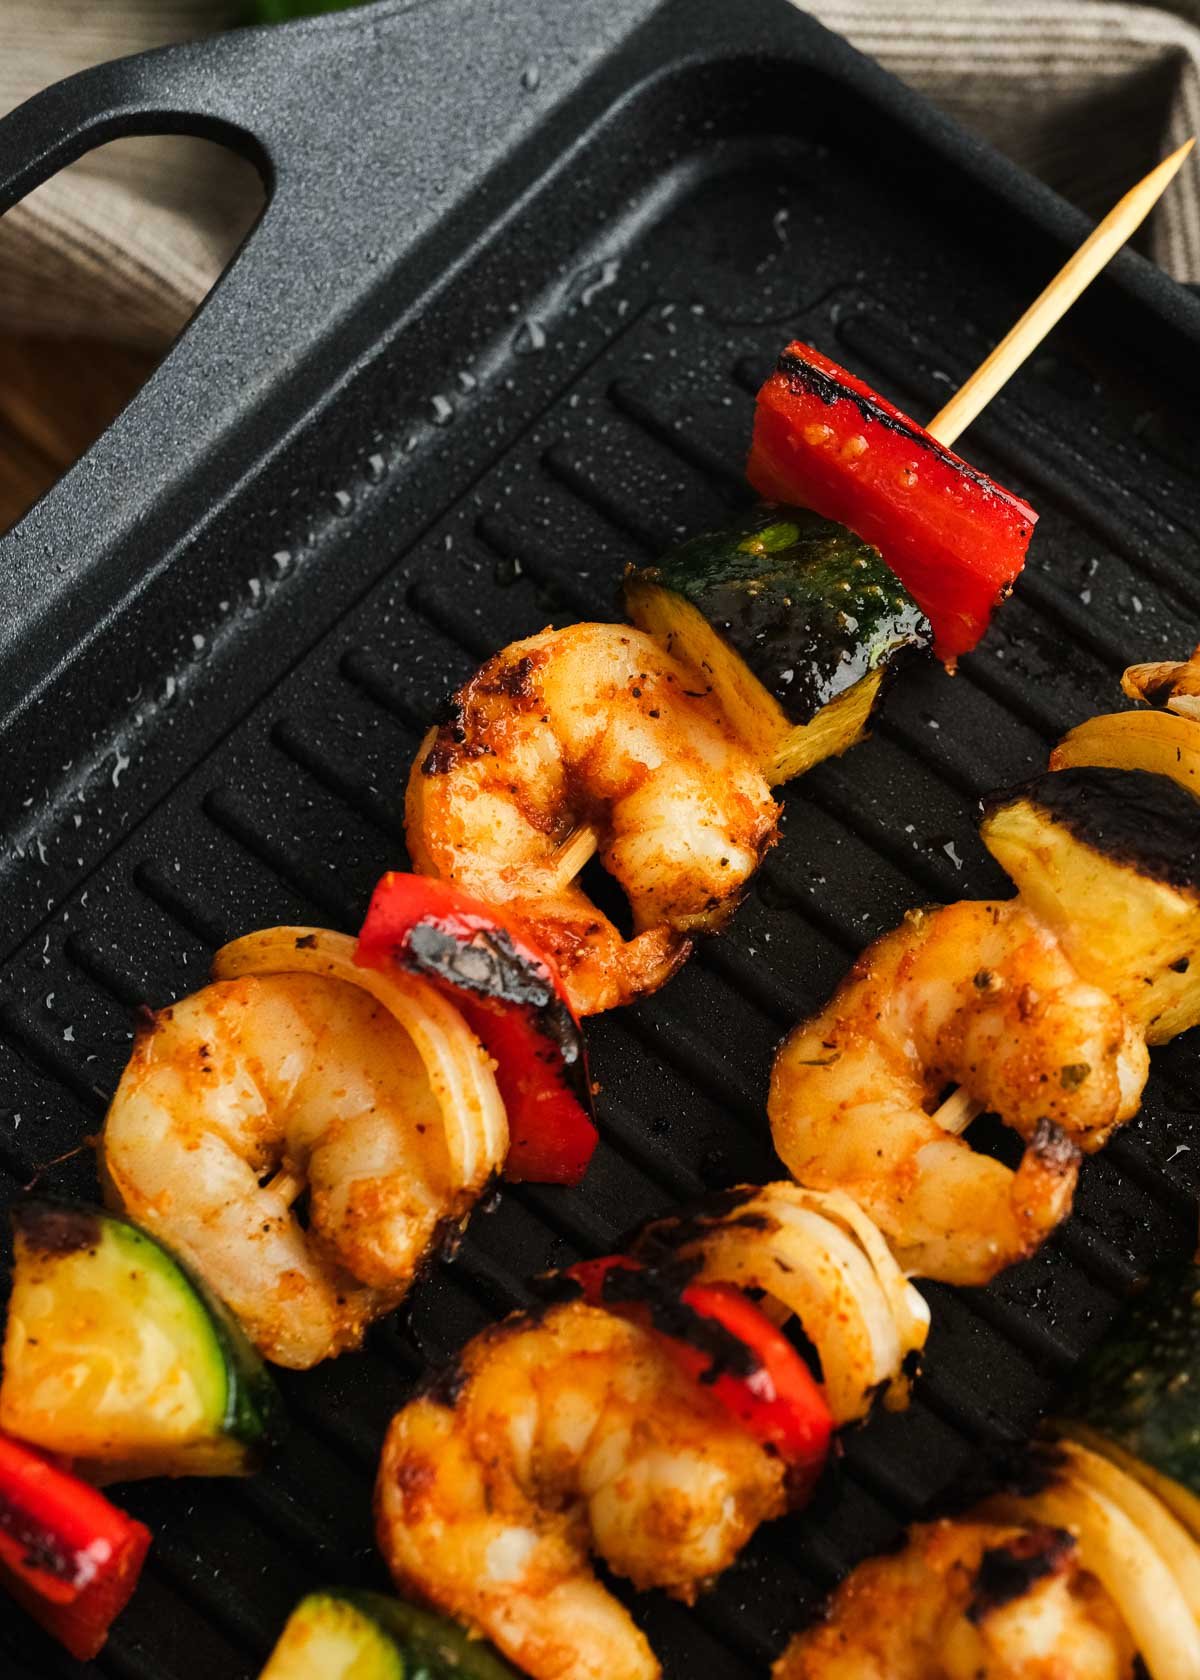 juicy shrimp, bell peppers, onion, and zucchini assembled on a skewer and cooking on the grill